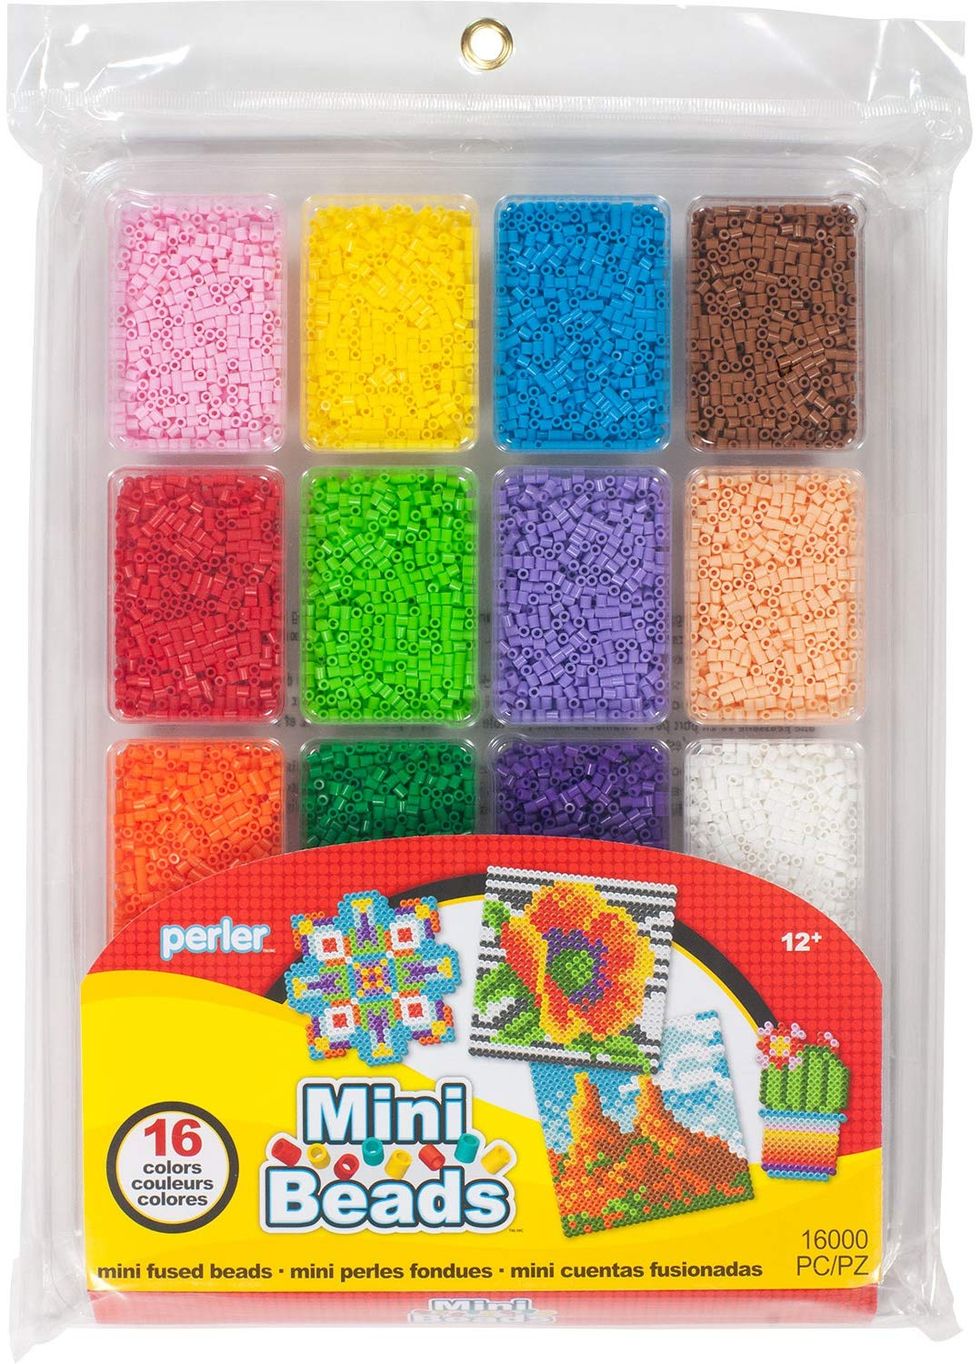 Perler beads: Everything you need to know